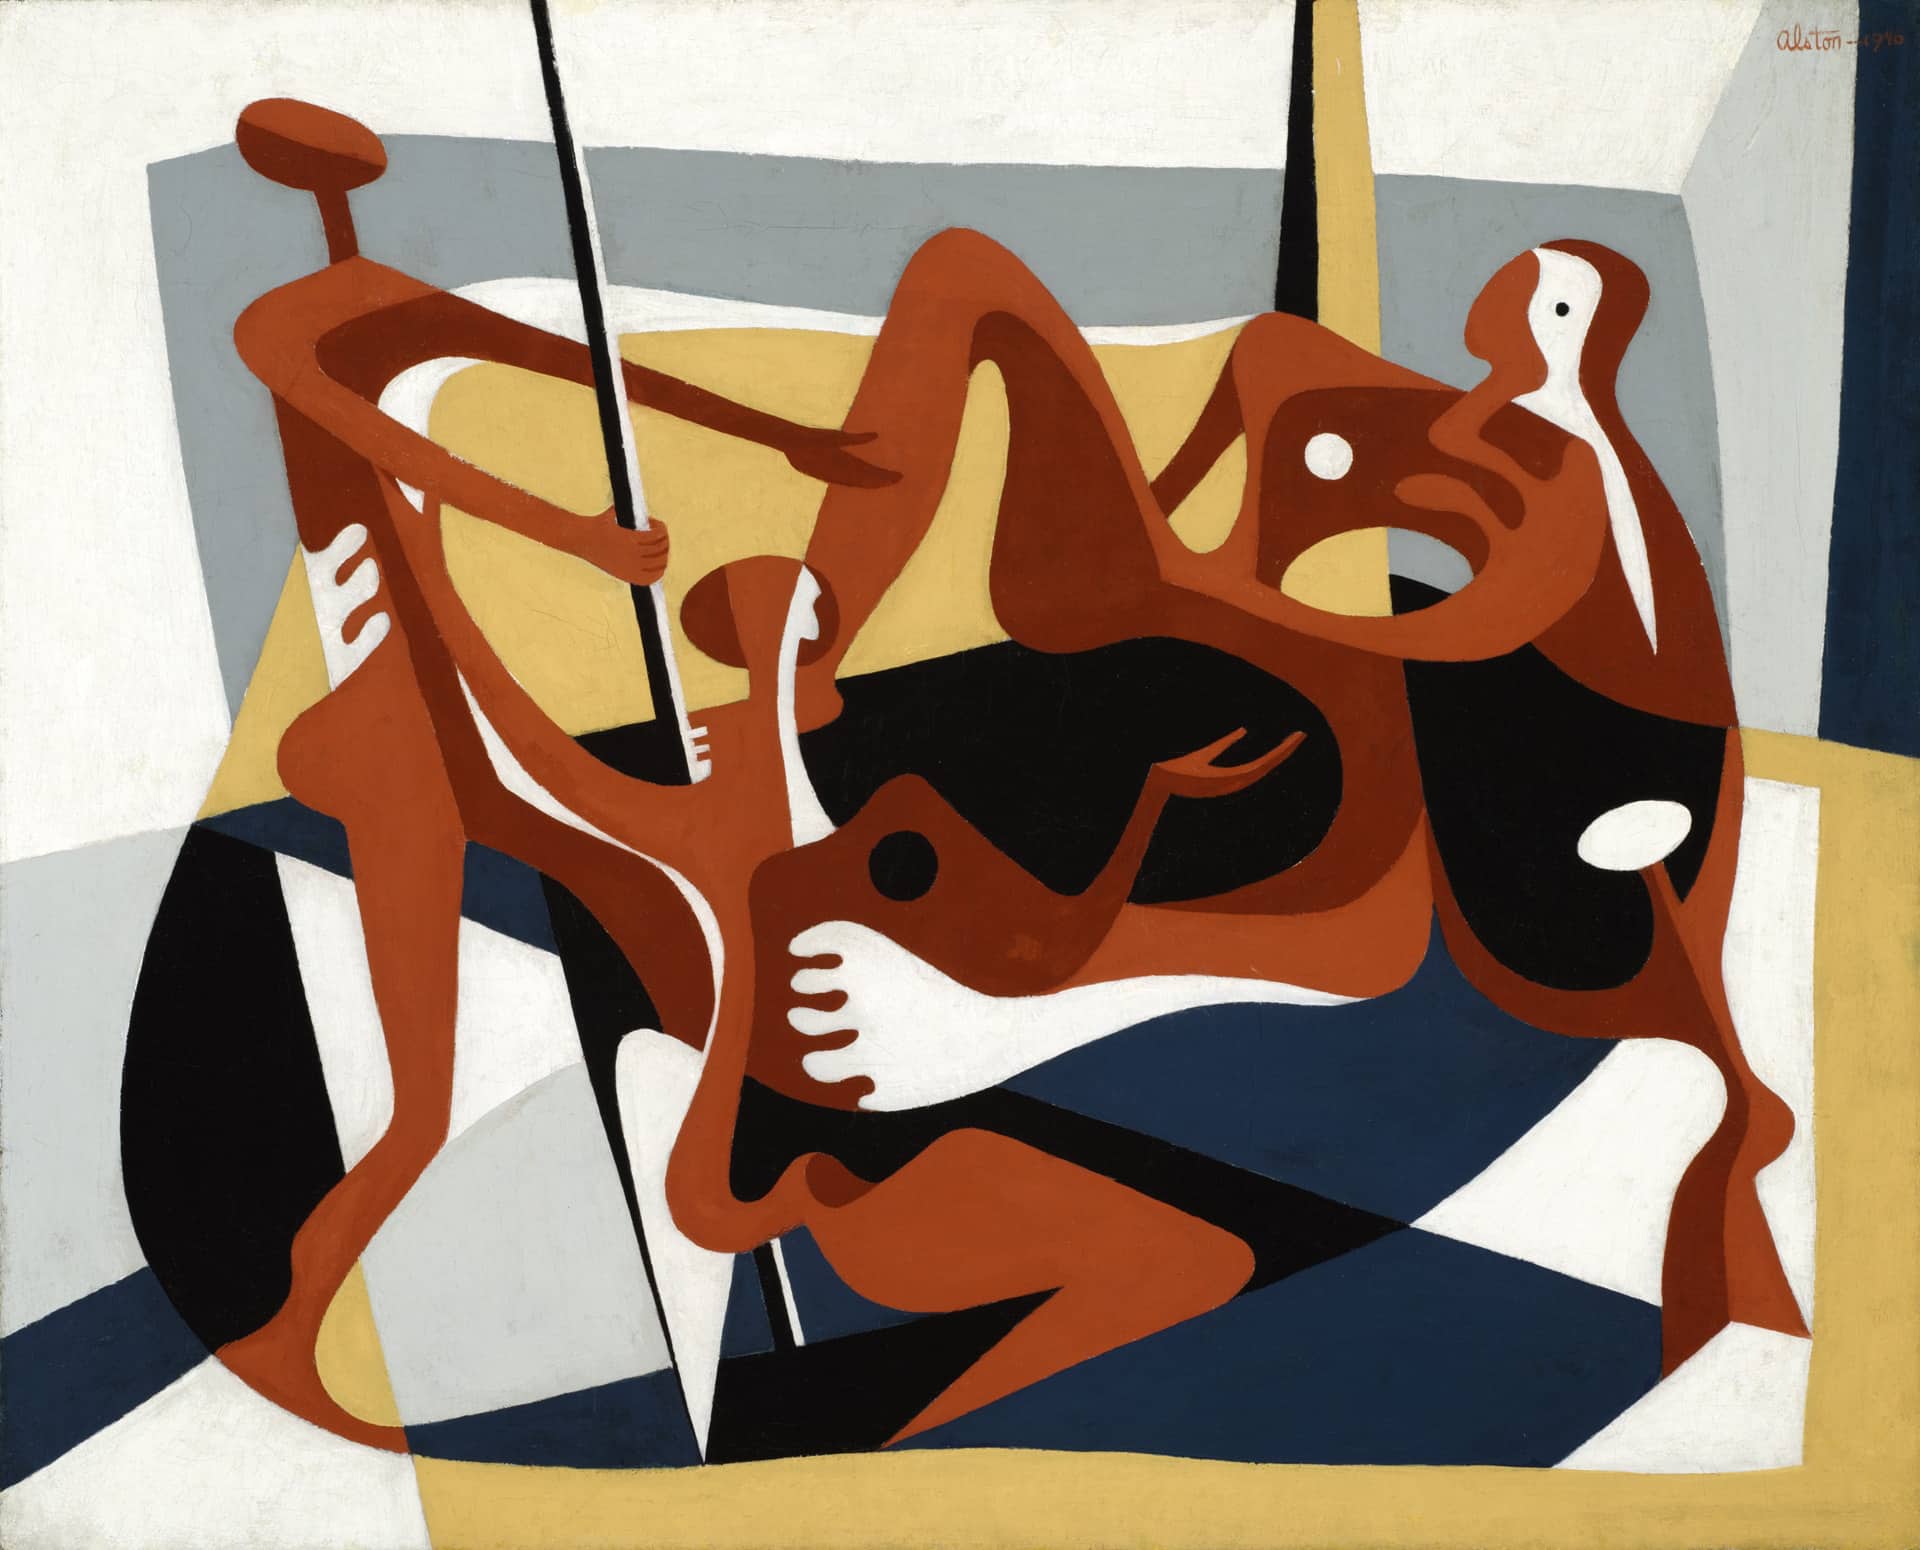 brown biomorphic figures appear to dance with an abstracted geometric background